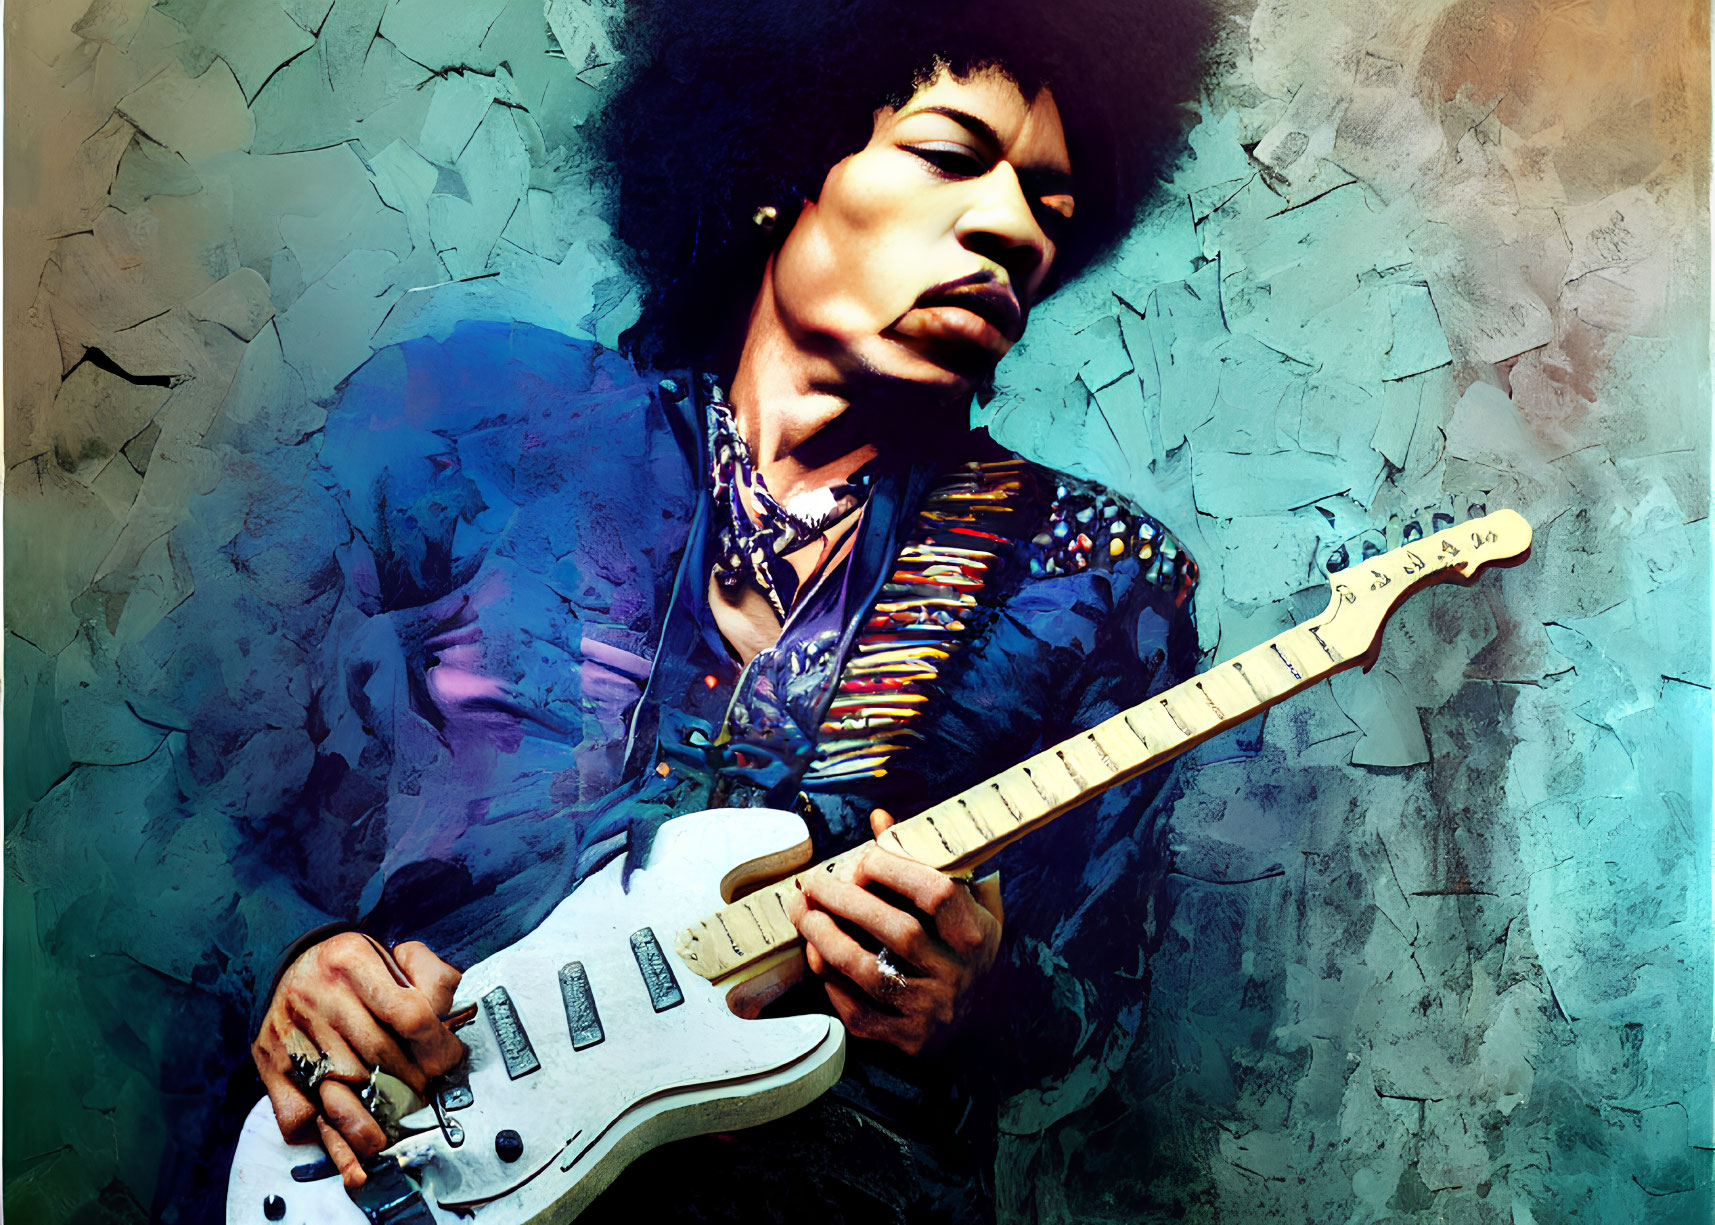 Stylized image of person with afro playing Fender guitar